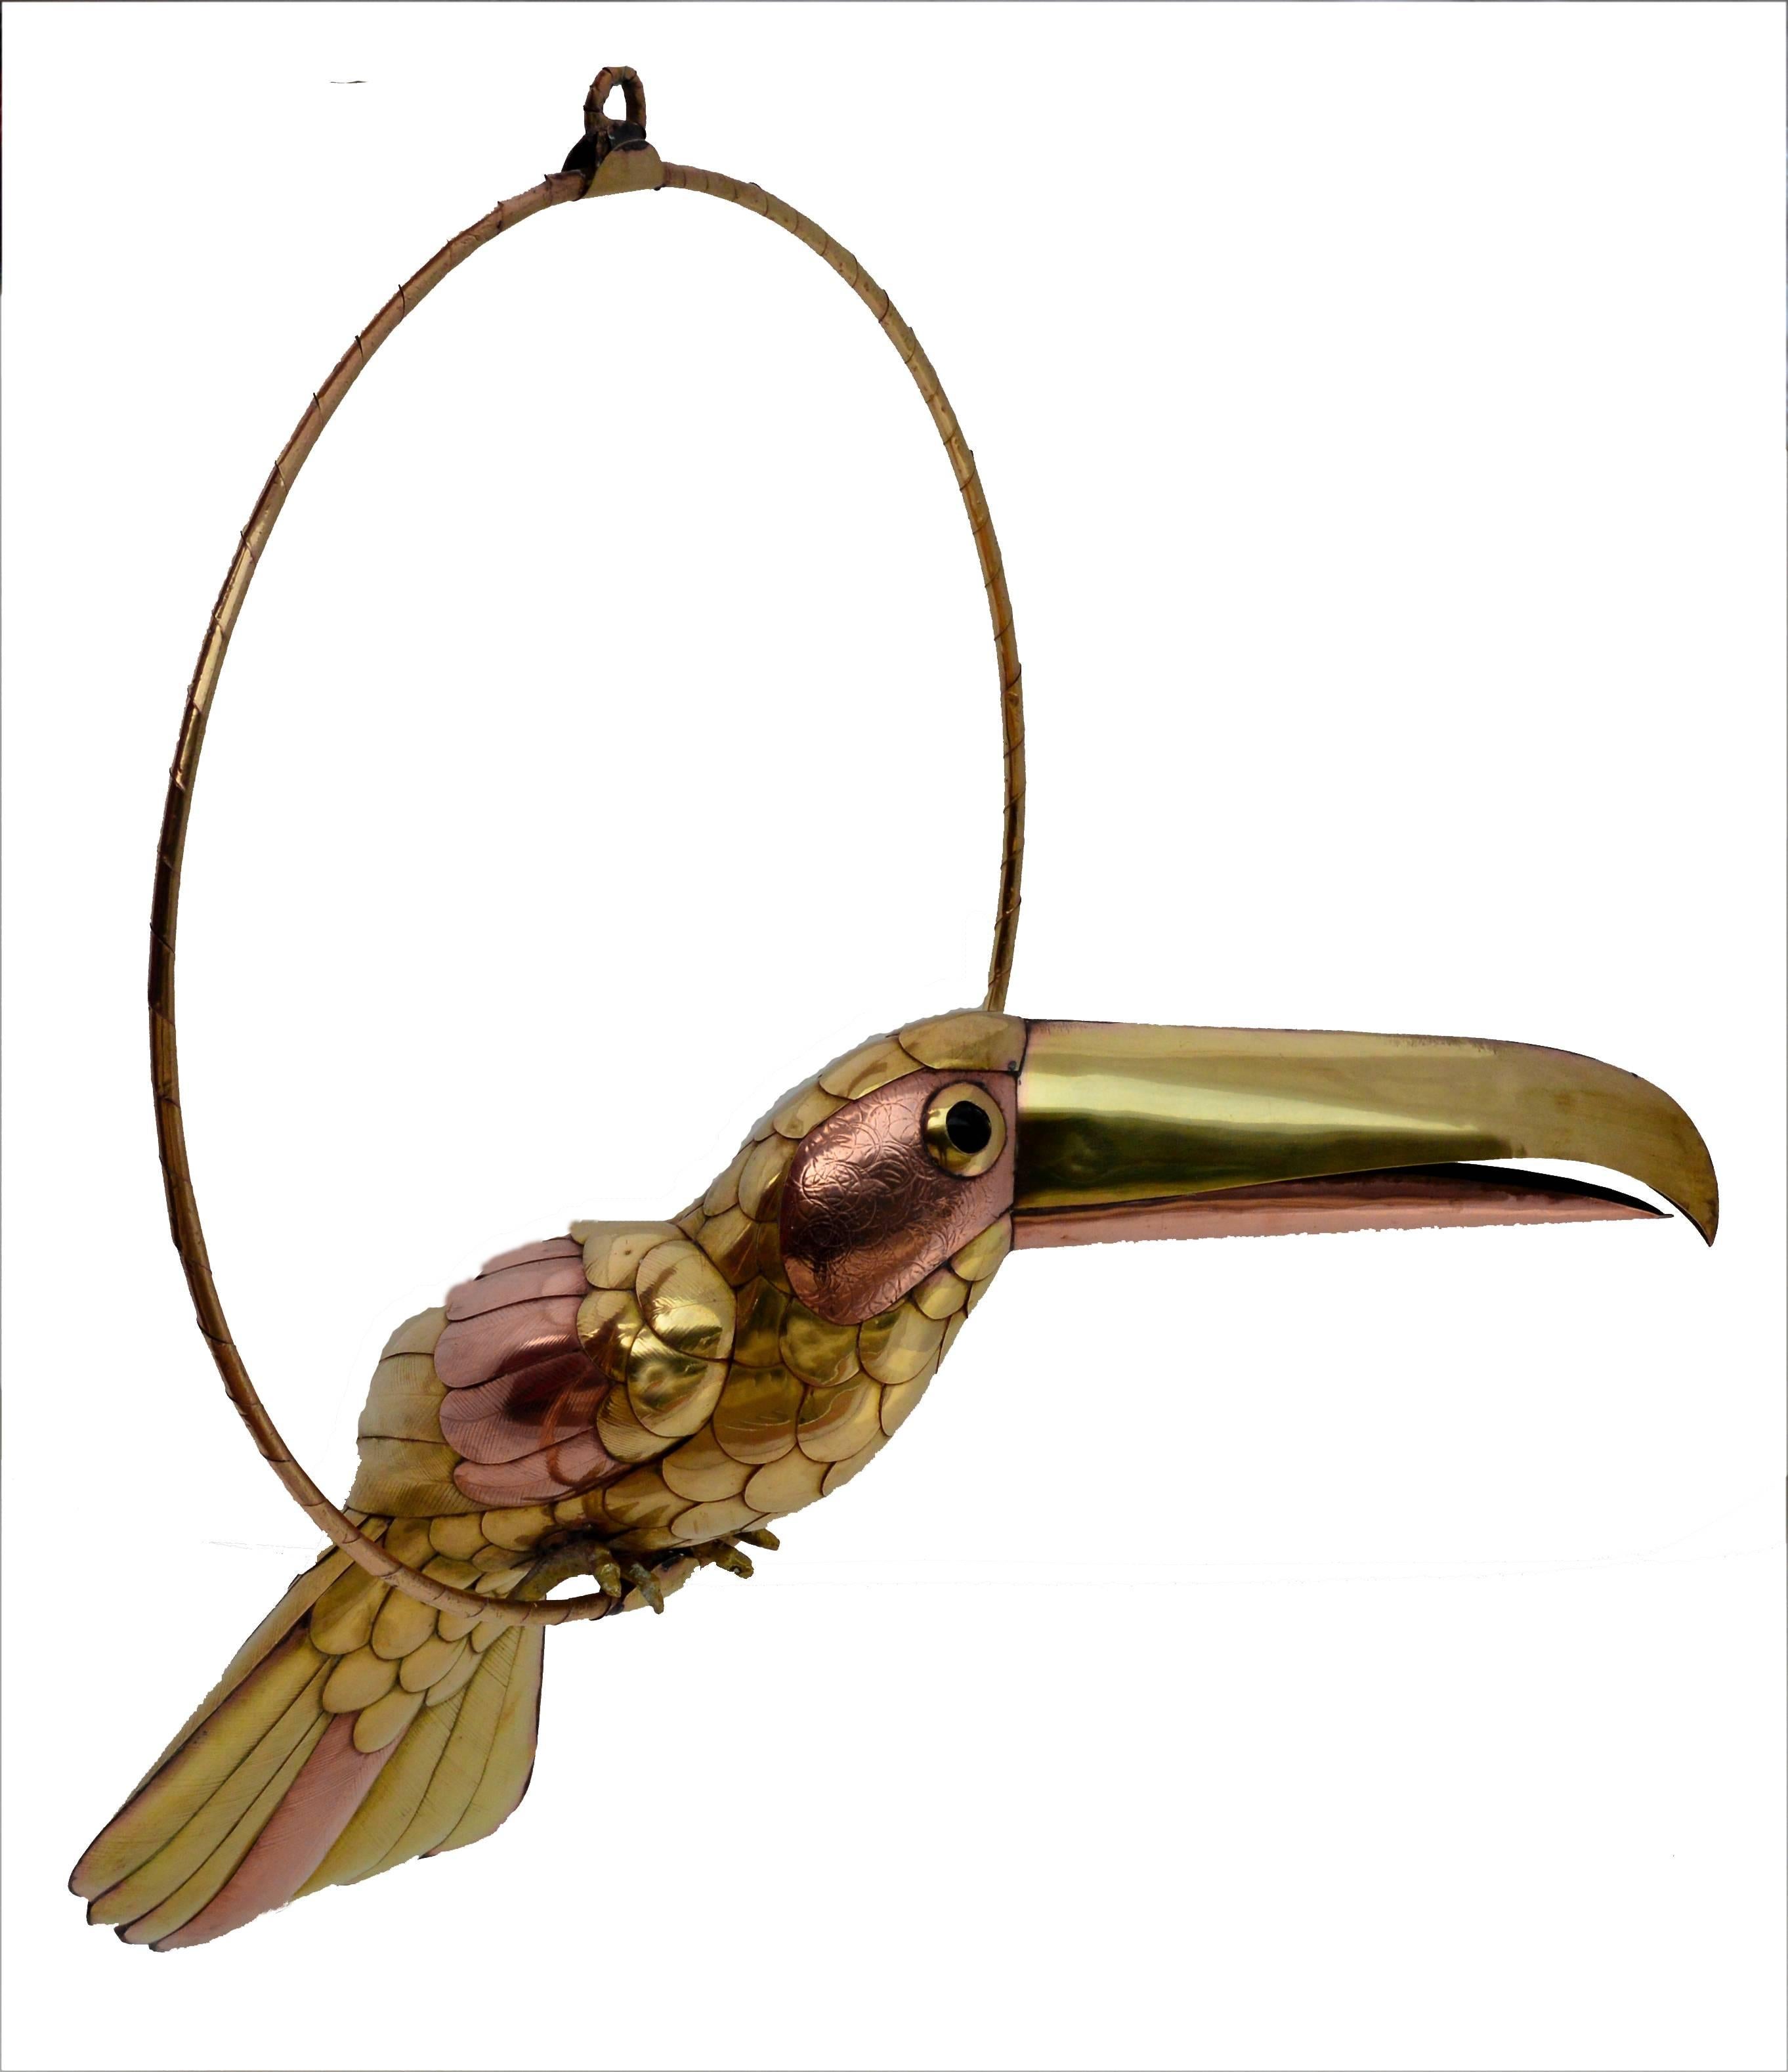 Whimsical brass and copper toucan sculpture by Mexican artist Sergio Bustamante (1934-2014). Toucan measures: 6" H x 16" L. Brass-wrapped hoop is 16" in diameter. 

Sergio Bustamante studied architecture at the University of